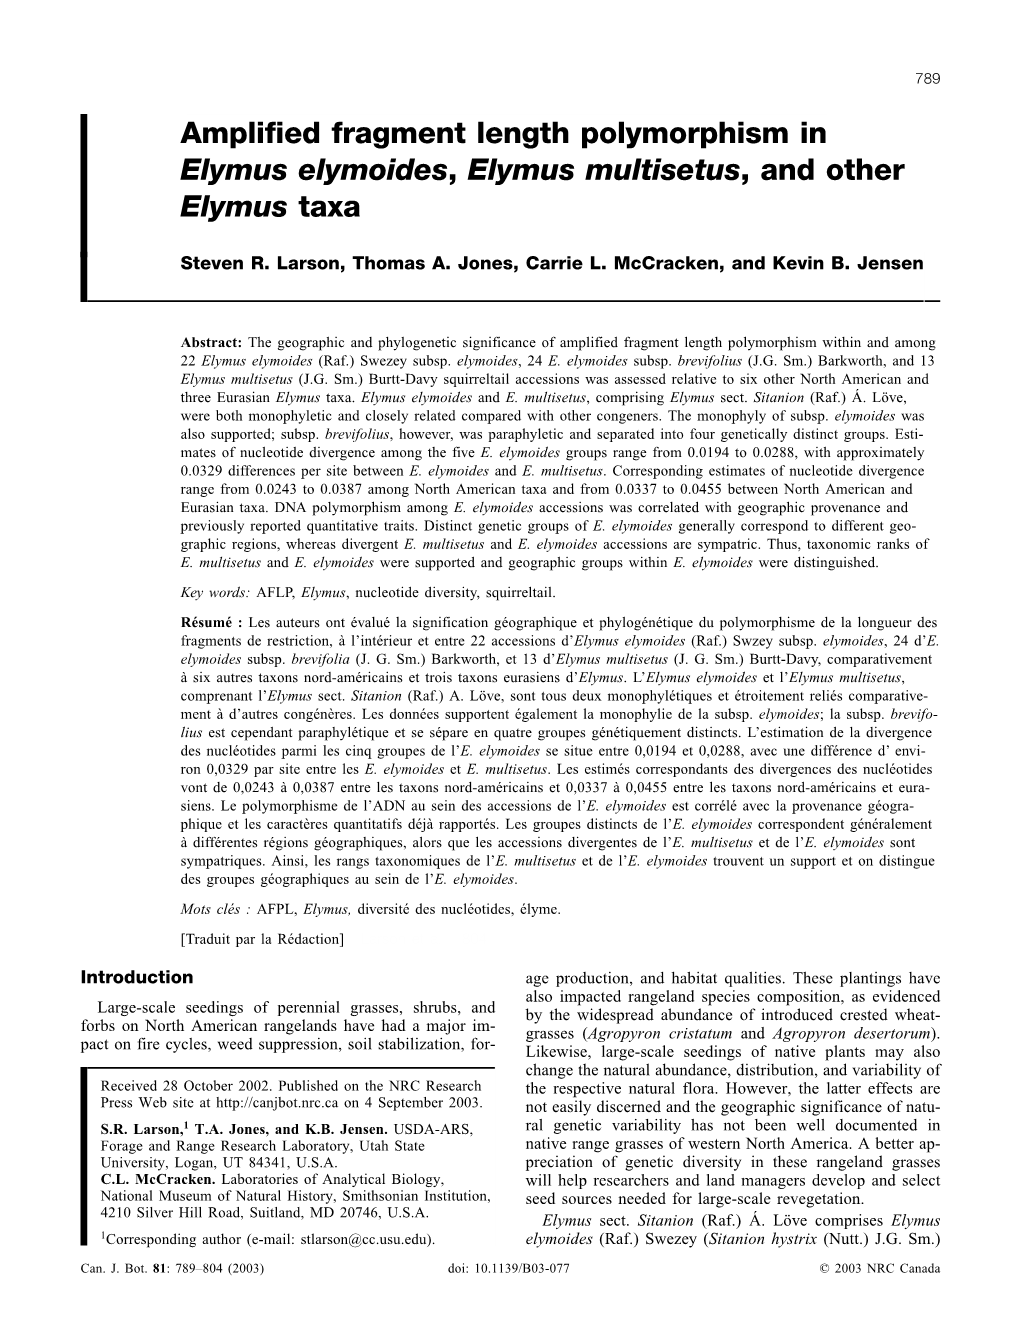 Amplified Fragment Length Polymorphism in E. Elymoides, E